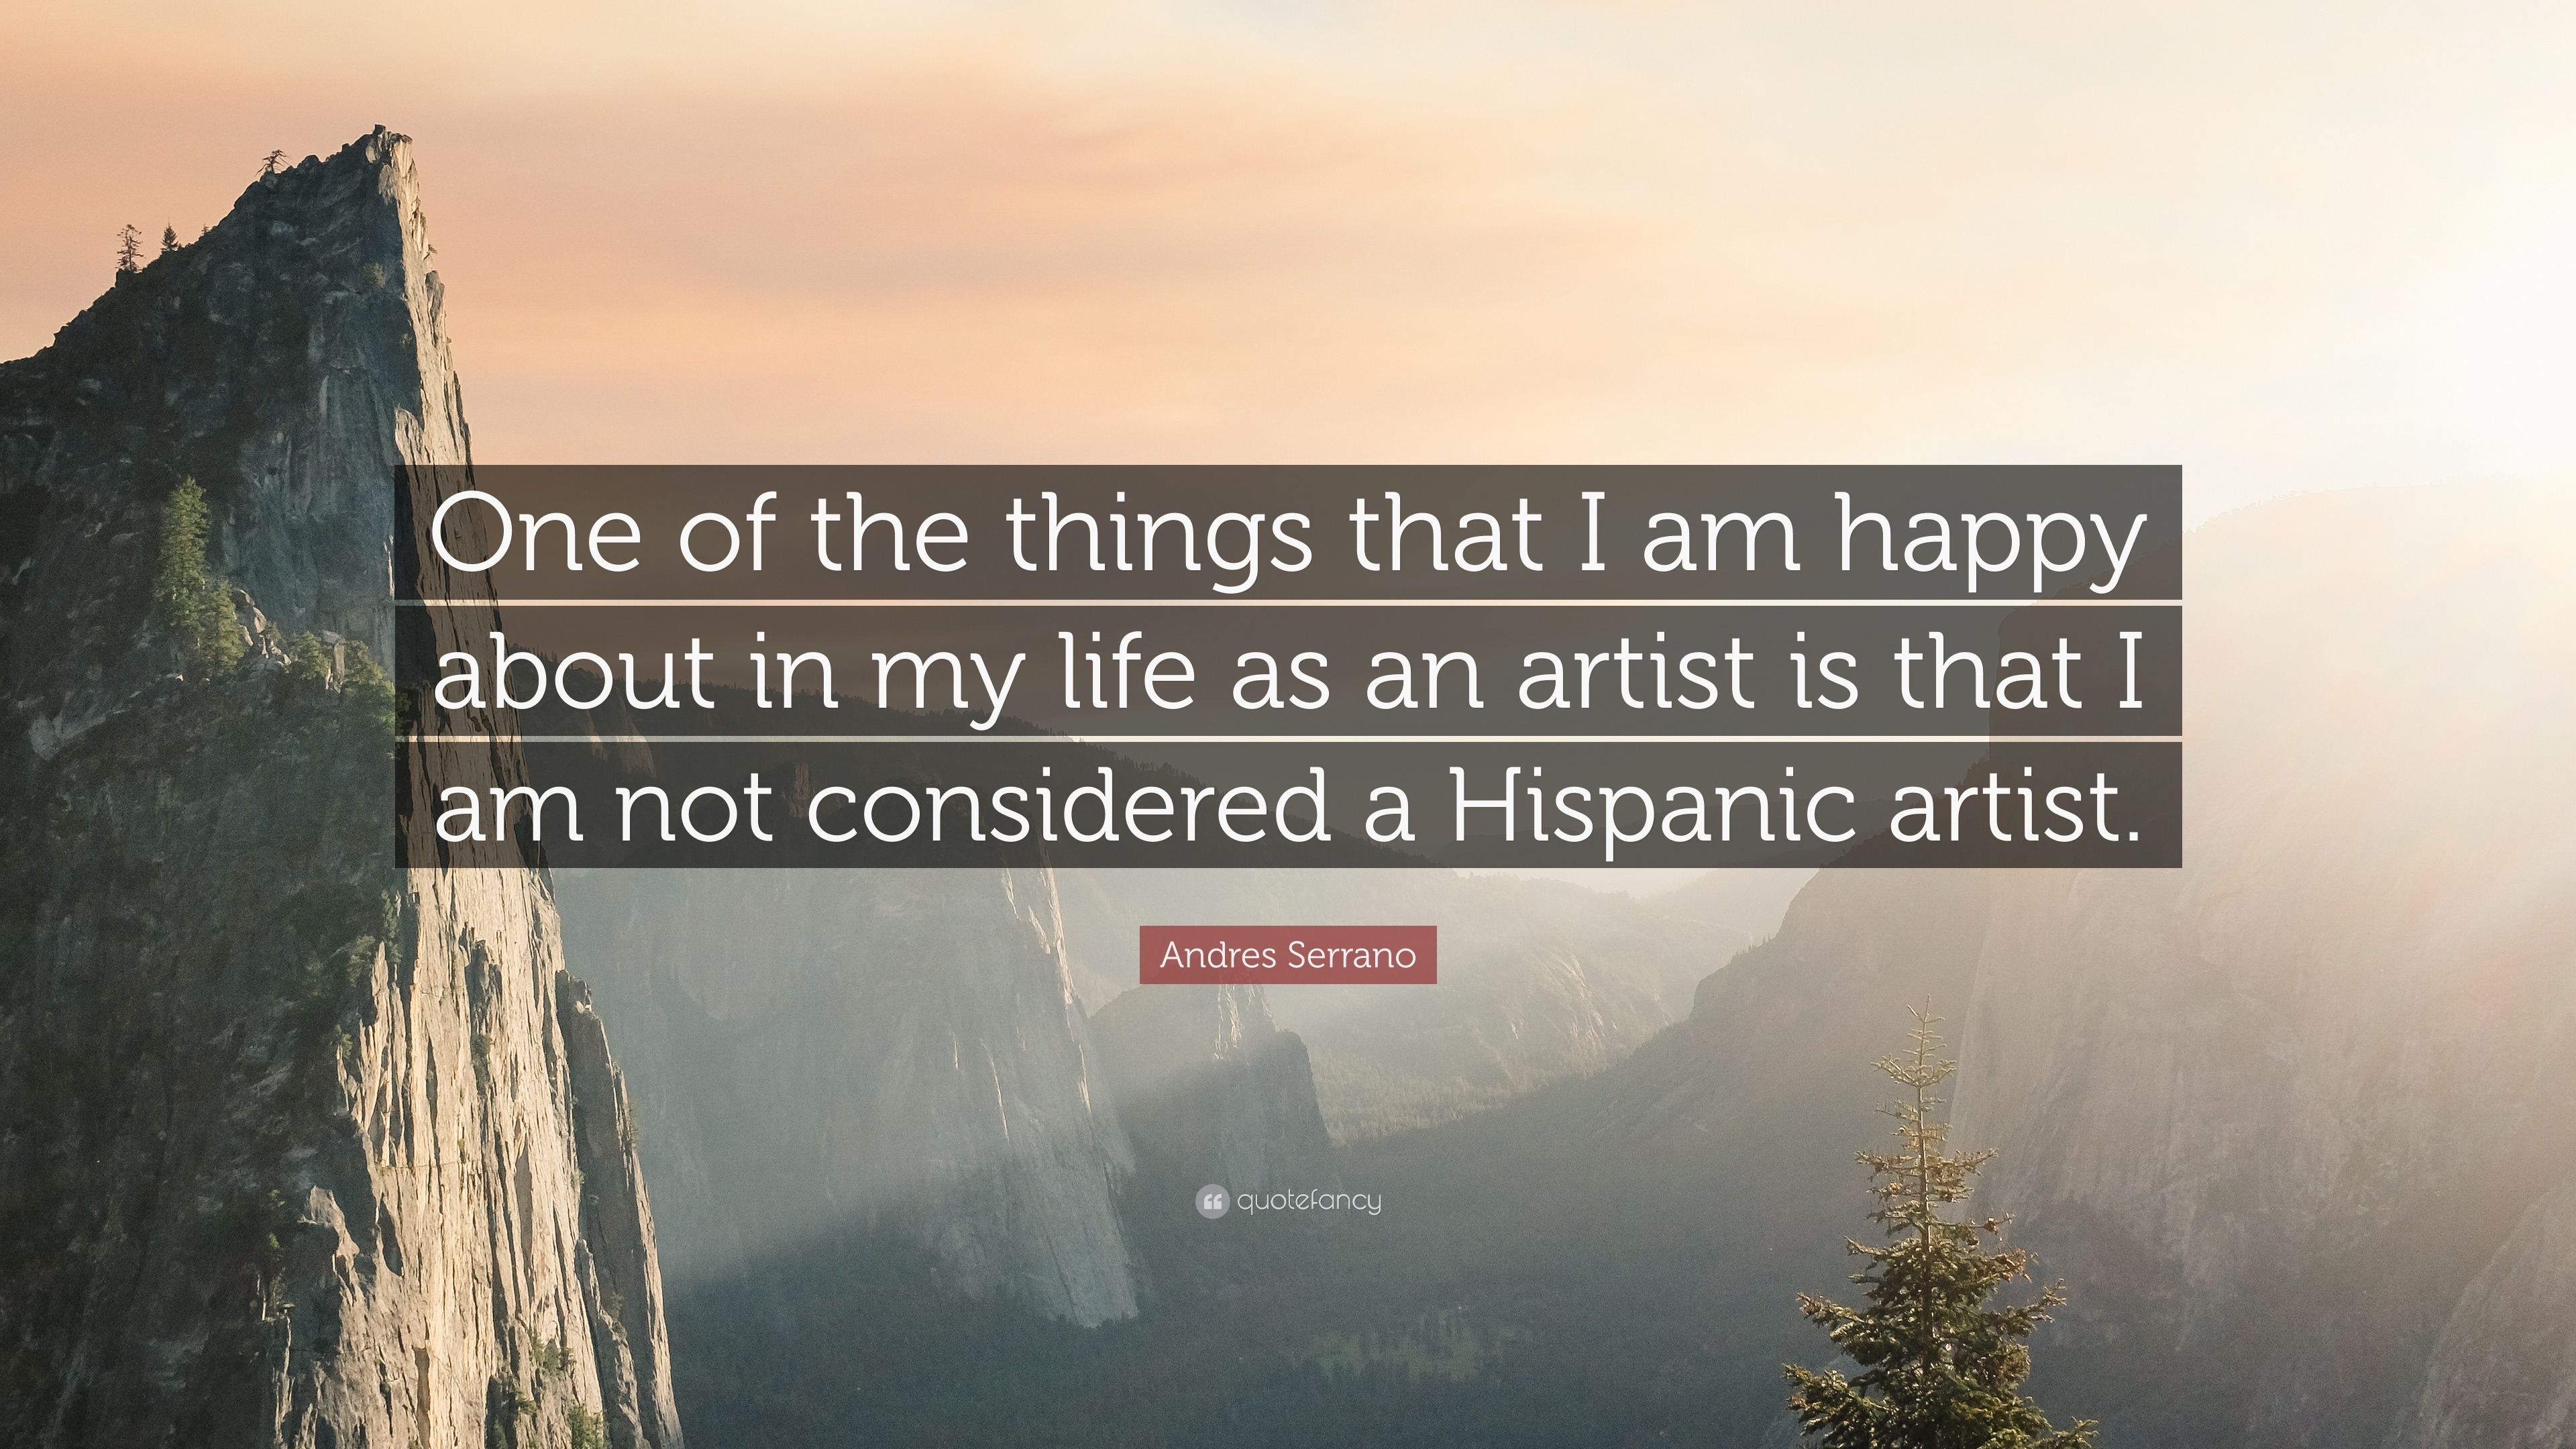 Andres Serrano Quote “ e of the things that I am happy about in my